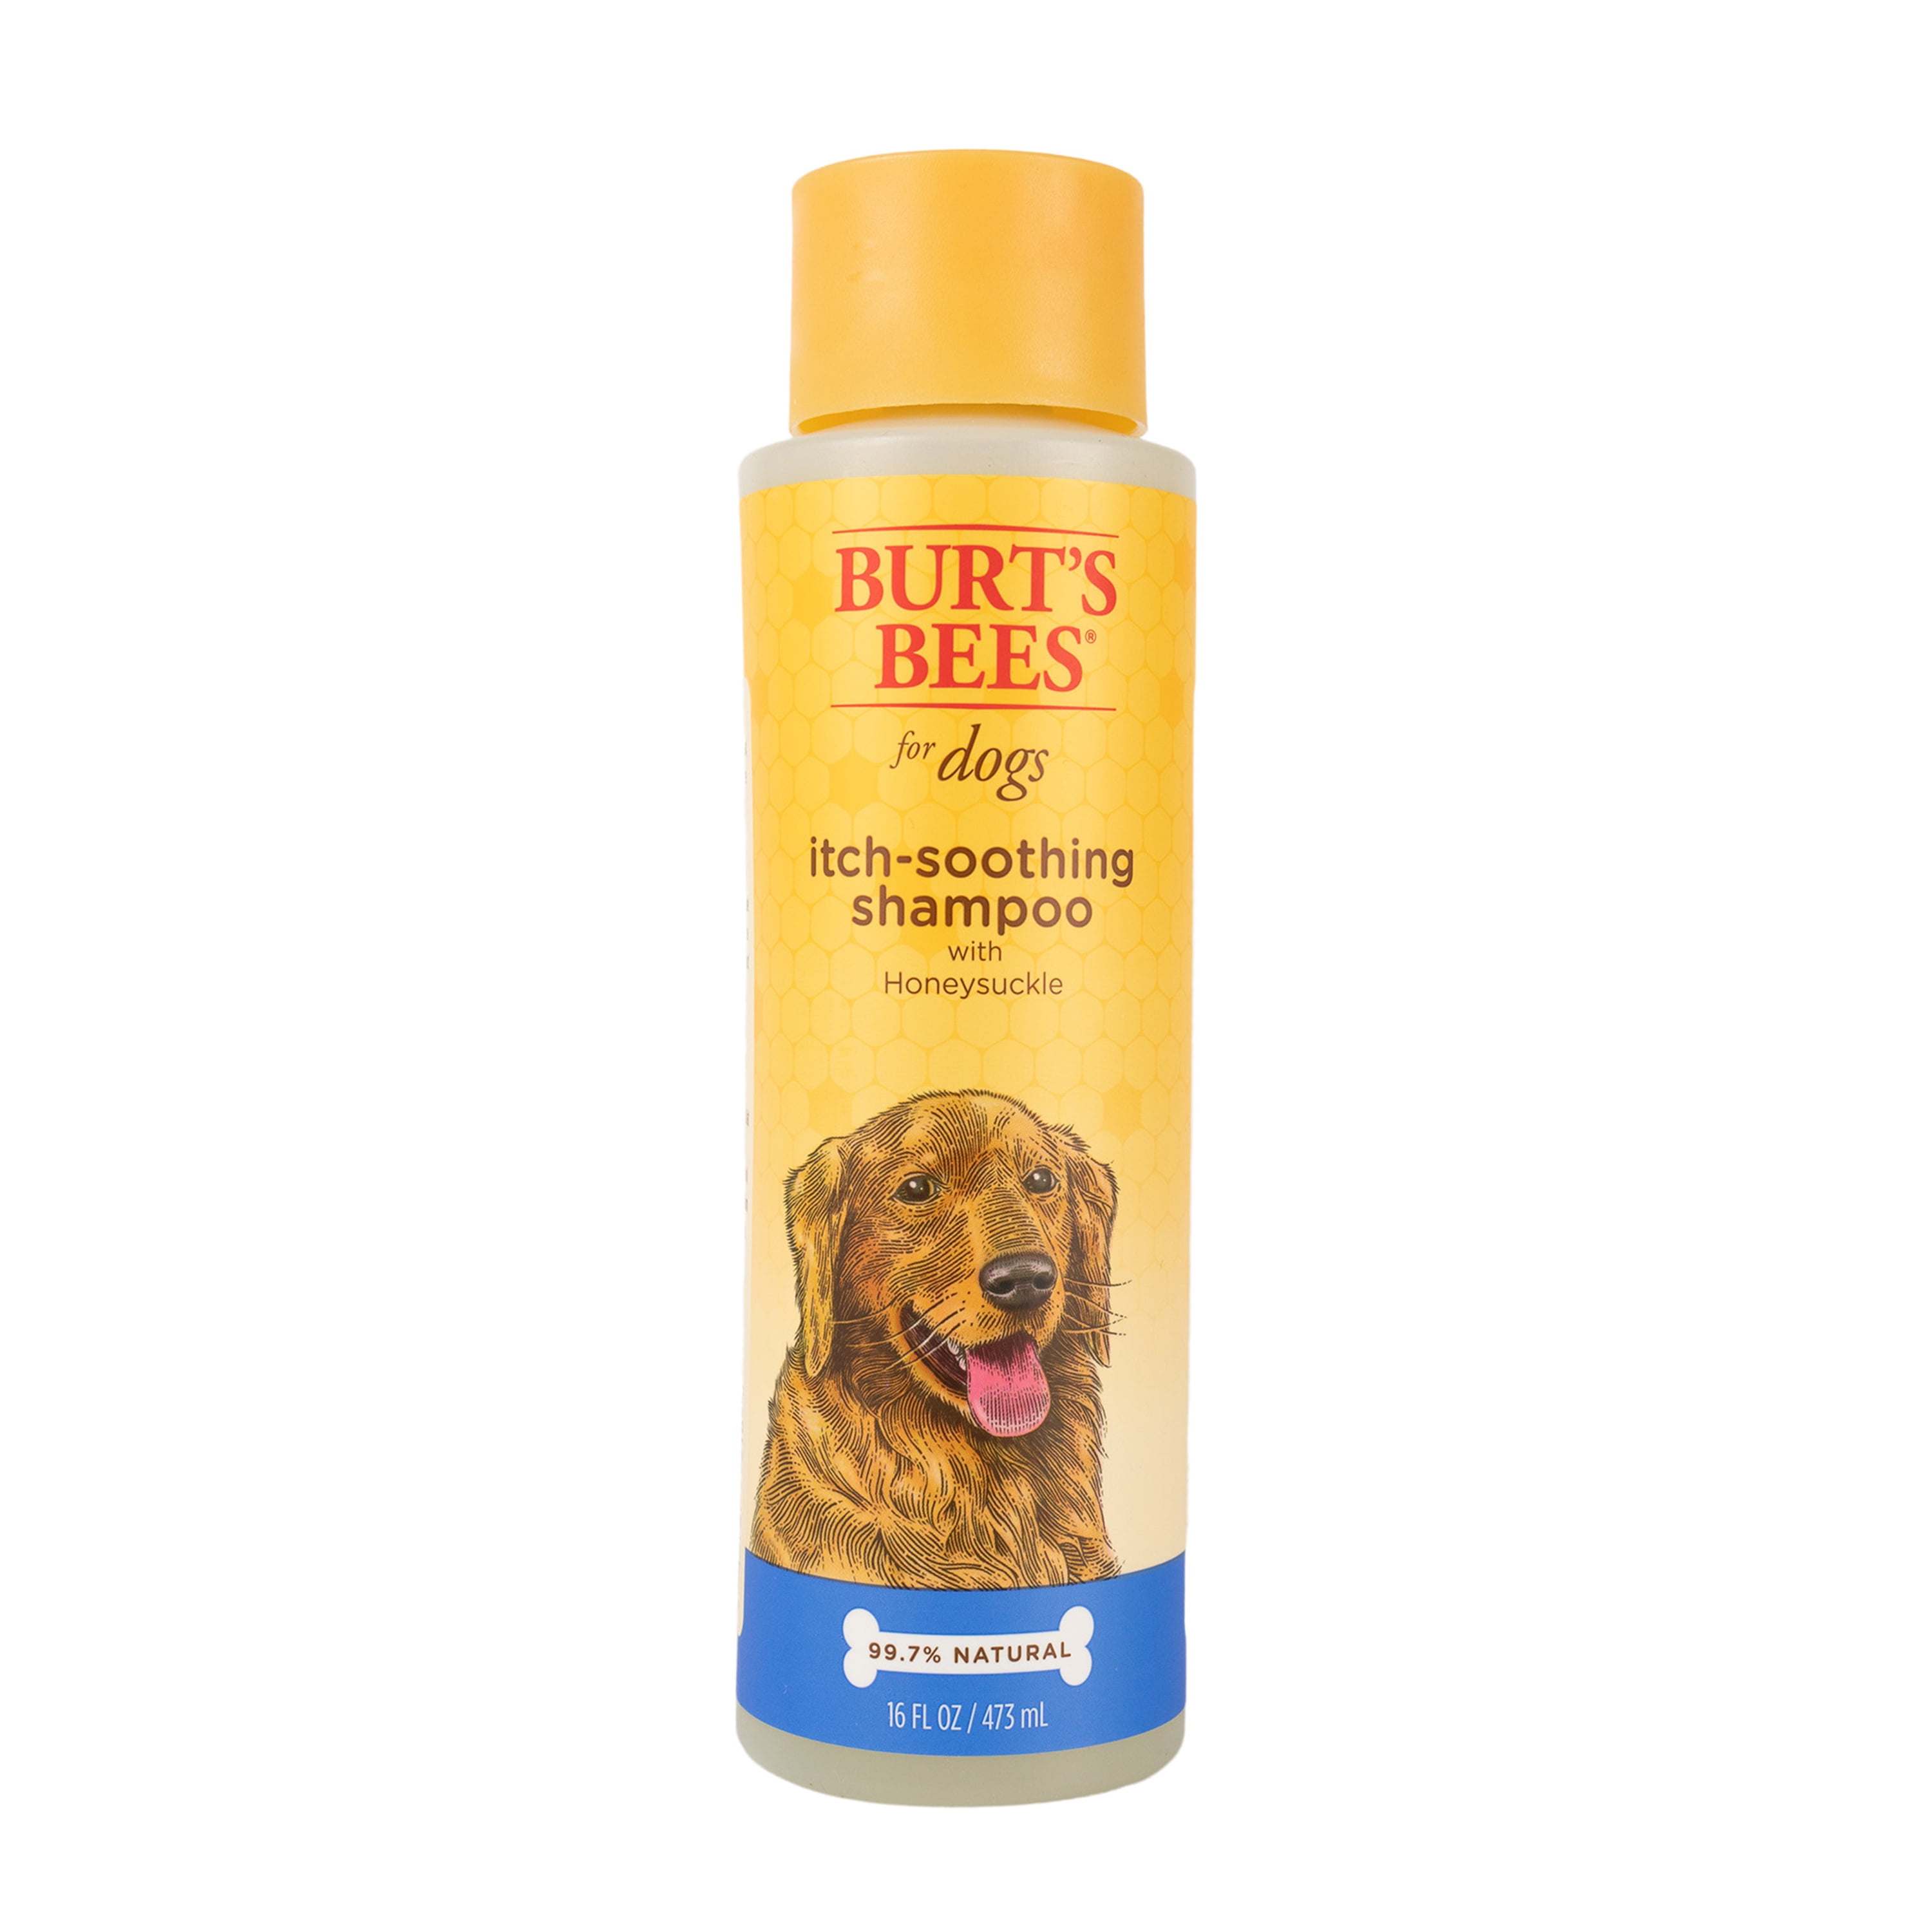 Burt's Bees Natural Pet Care Itch Soothing Shampoo with Honeysuckle for Dogs, 16 oz.